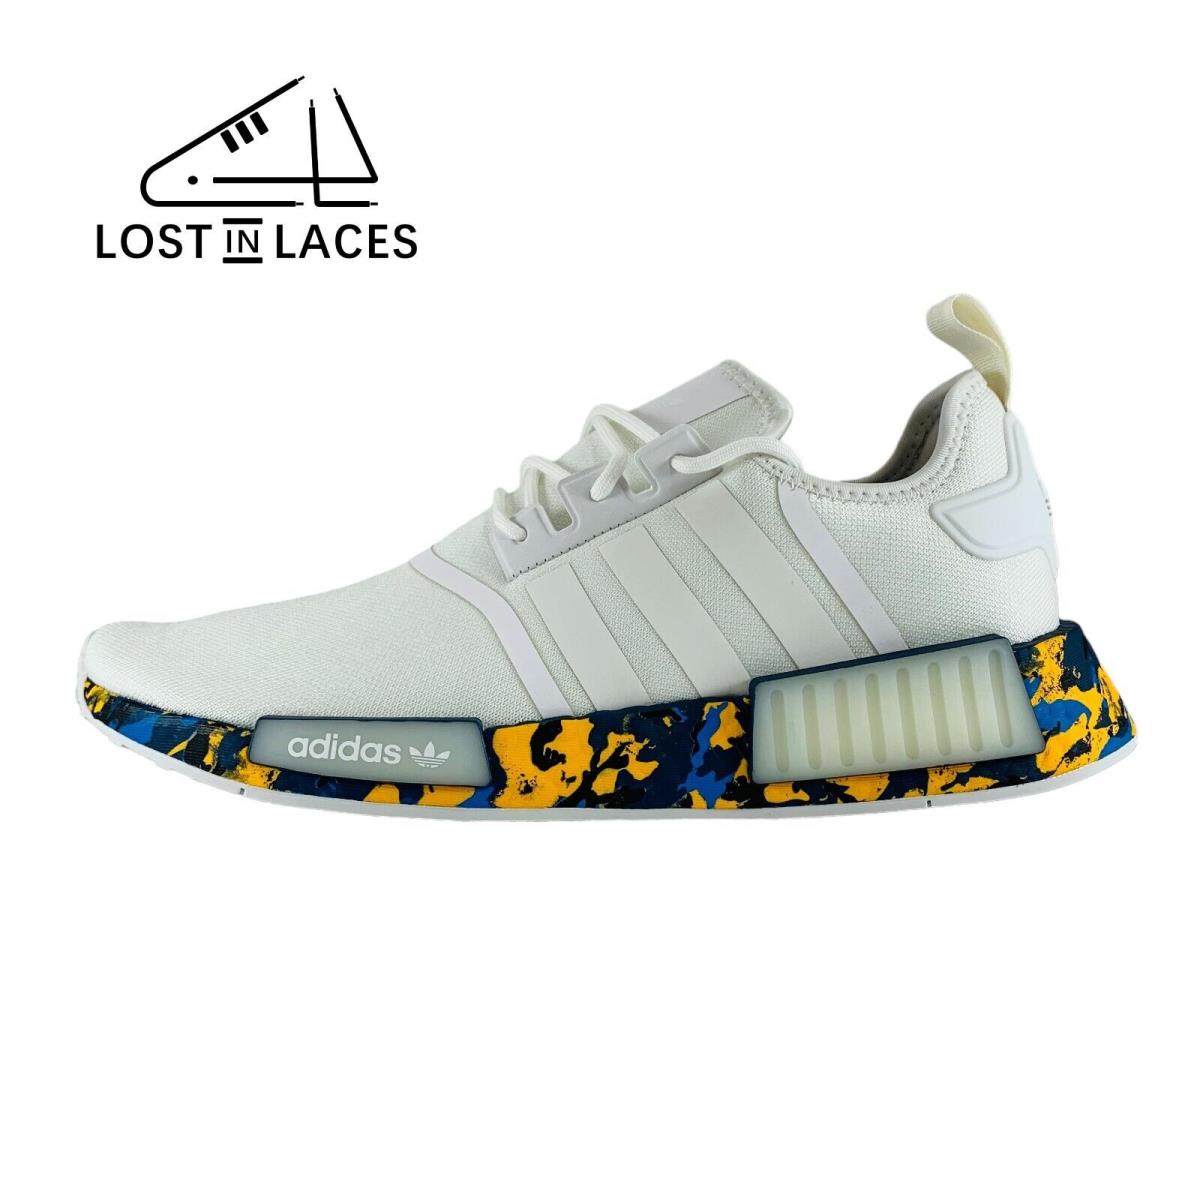 Adidas NMD_R1 White Camo Gold Blue Sneakers Men`s Shoes GX4466 - White